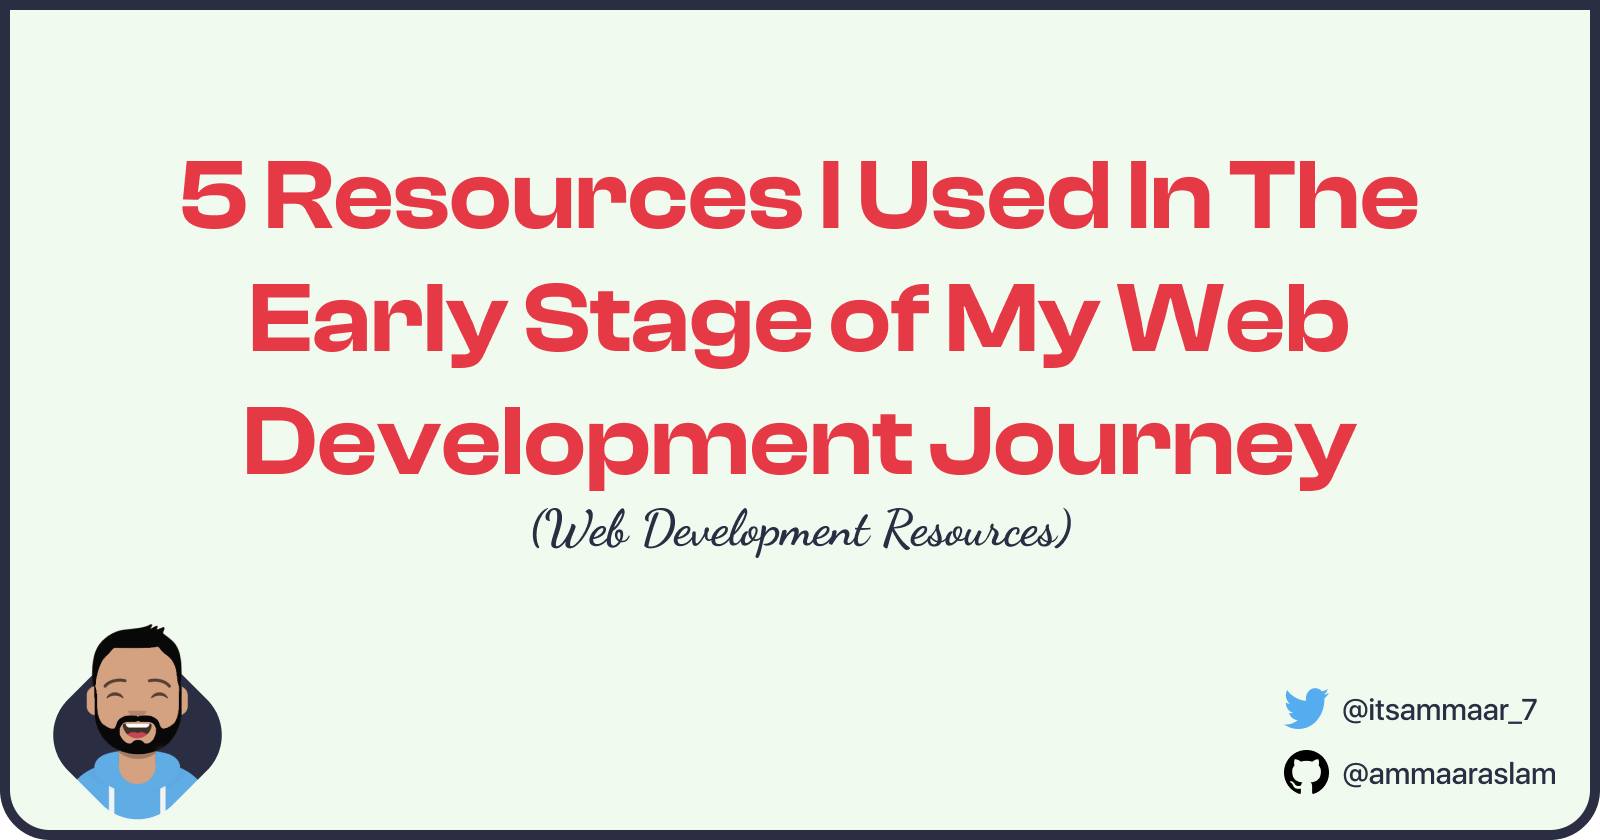 5 Resources I Used In The Early Stage of My Web Development Journey